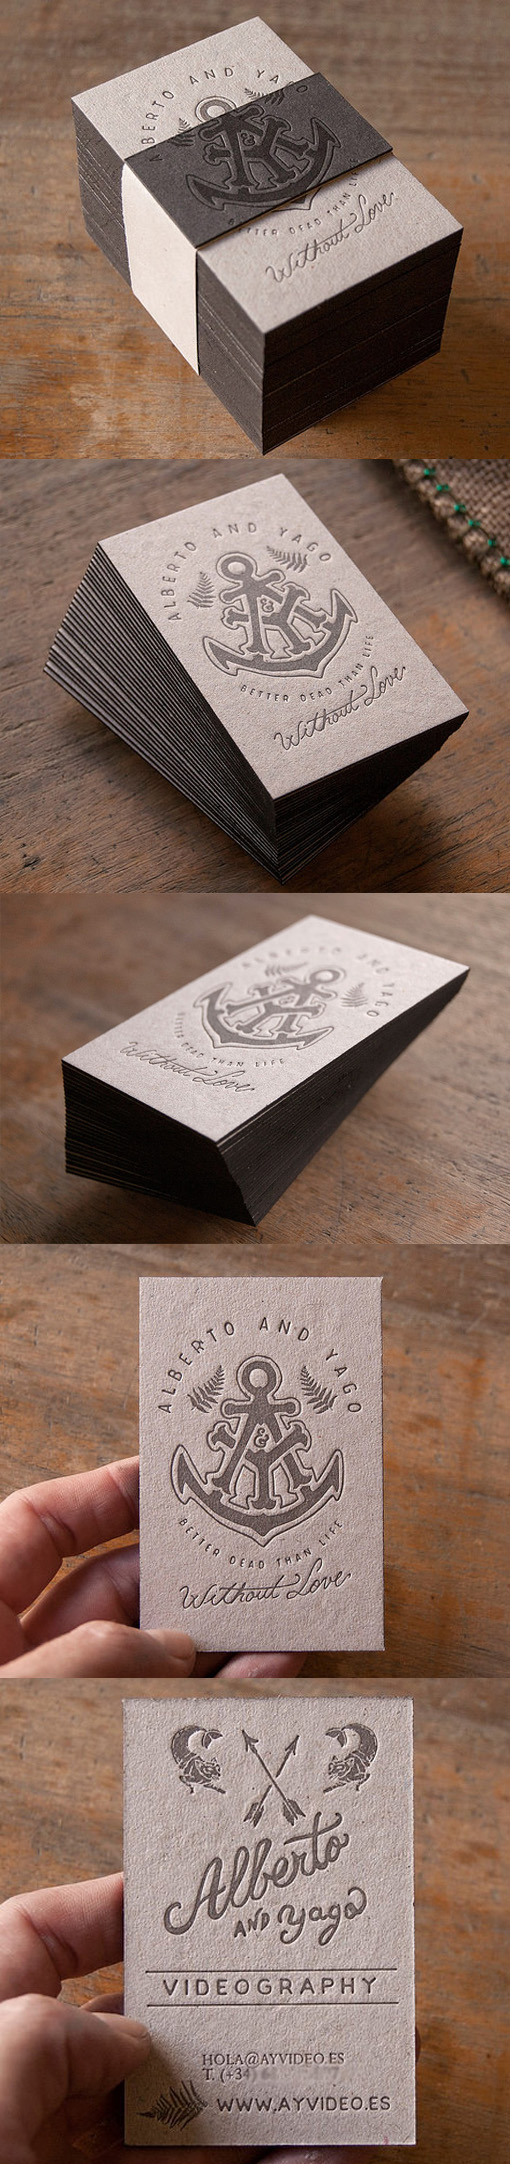 Earthy Vintage Styled Letterpress Business Card Set For A Videographer